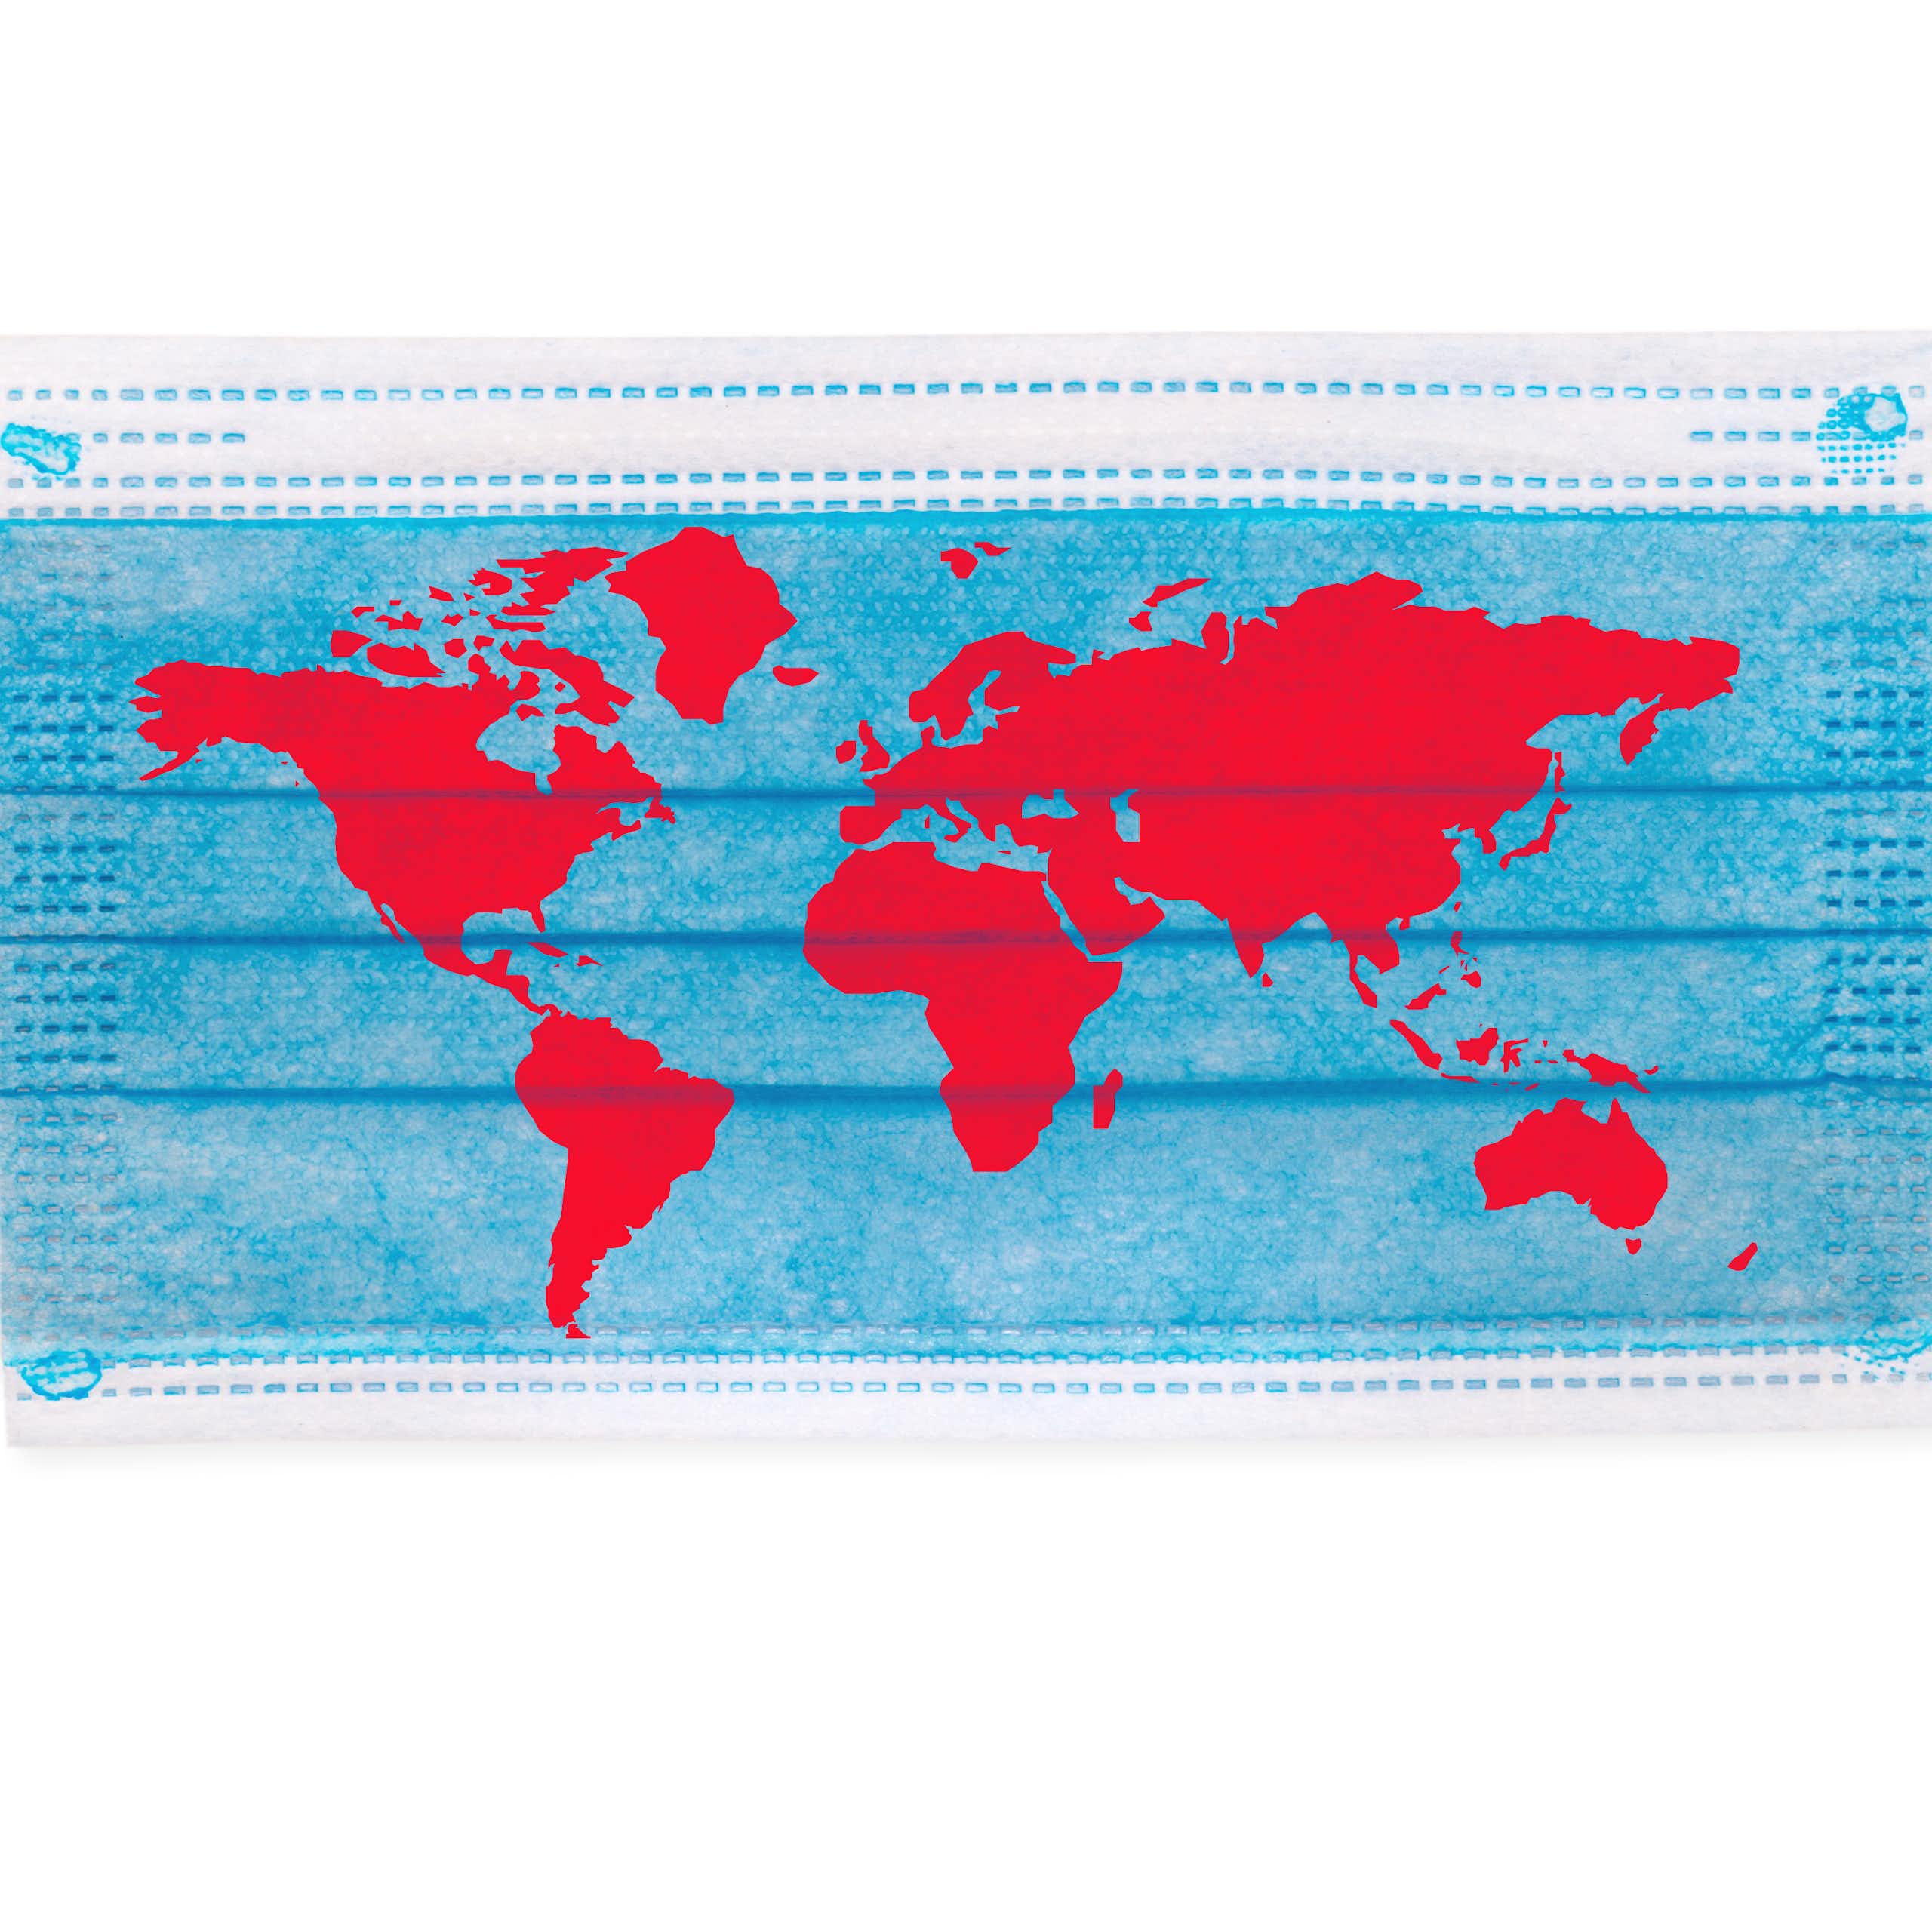 A blue surgical mask with the world map in red